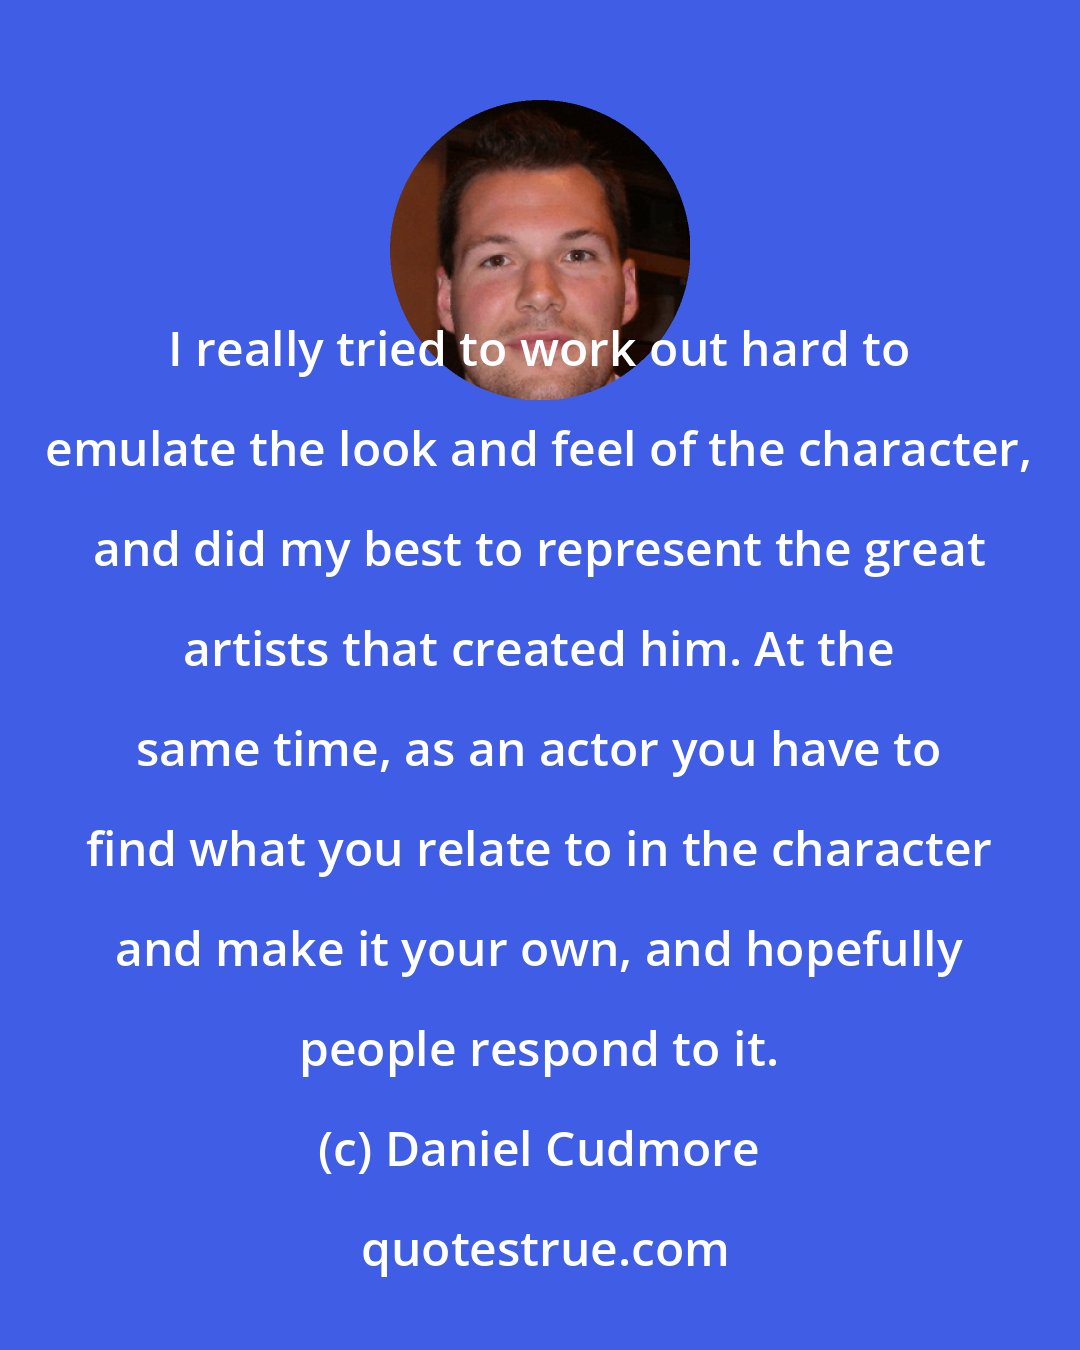 Daniel Cudmore: I really tried to work out hard to emulate the look and feel of the character, and did my best to represent the great artists that created him. At the same time, as an actor you have to find what you relate to in the character and make it your own, and hopefully people respond to it.